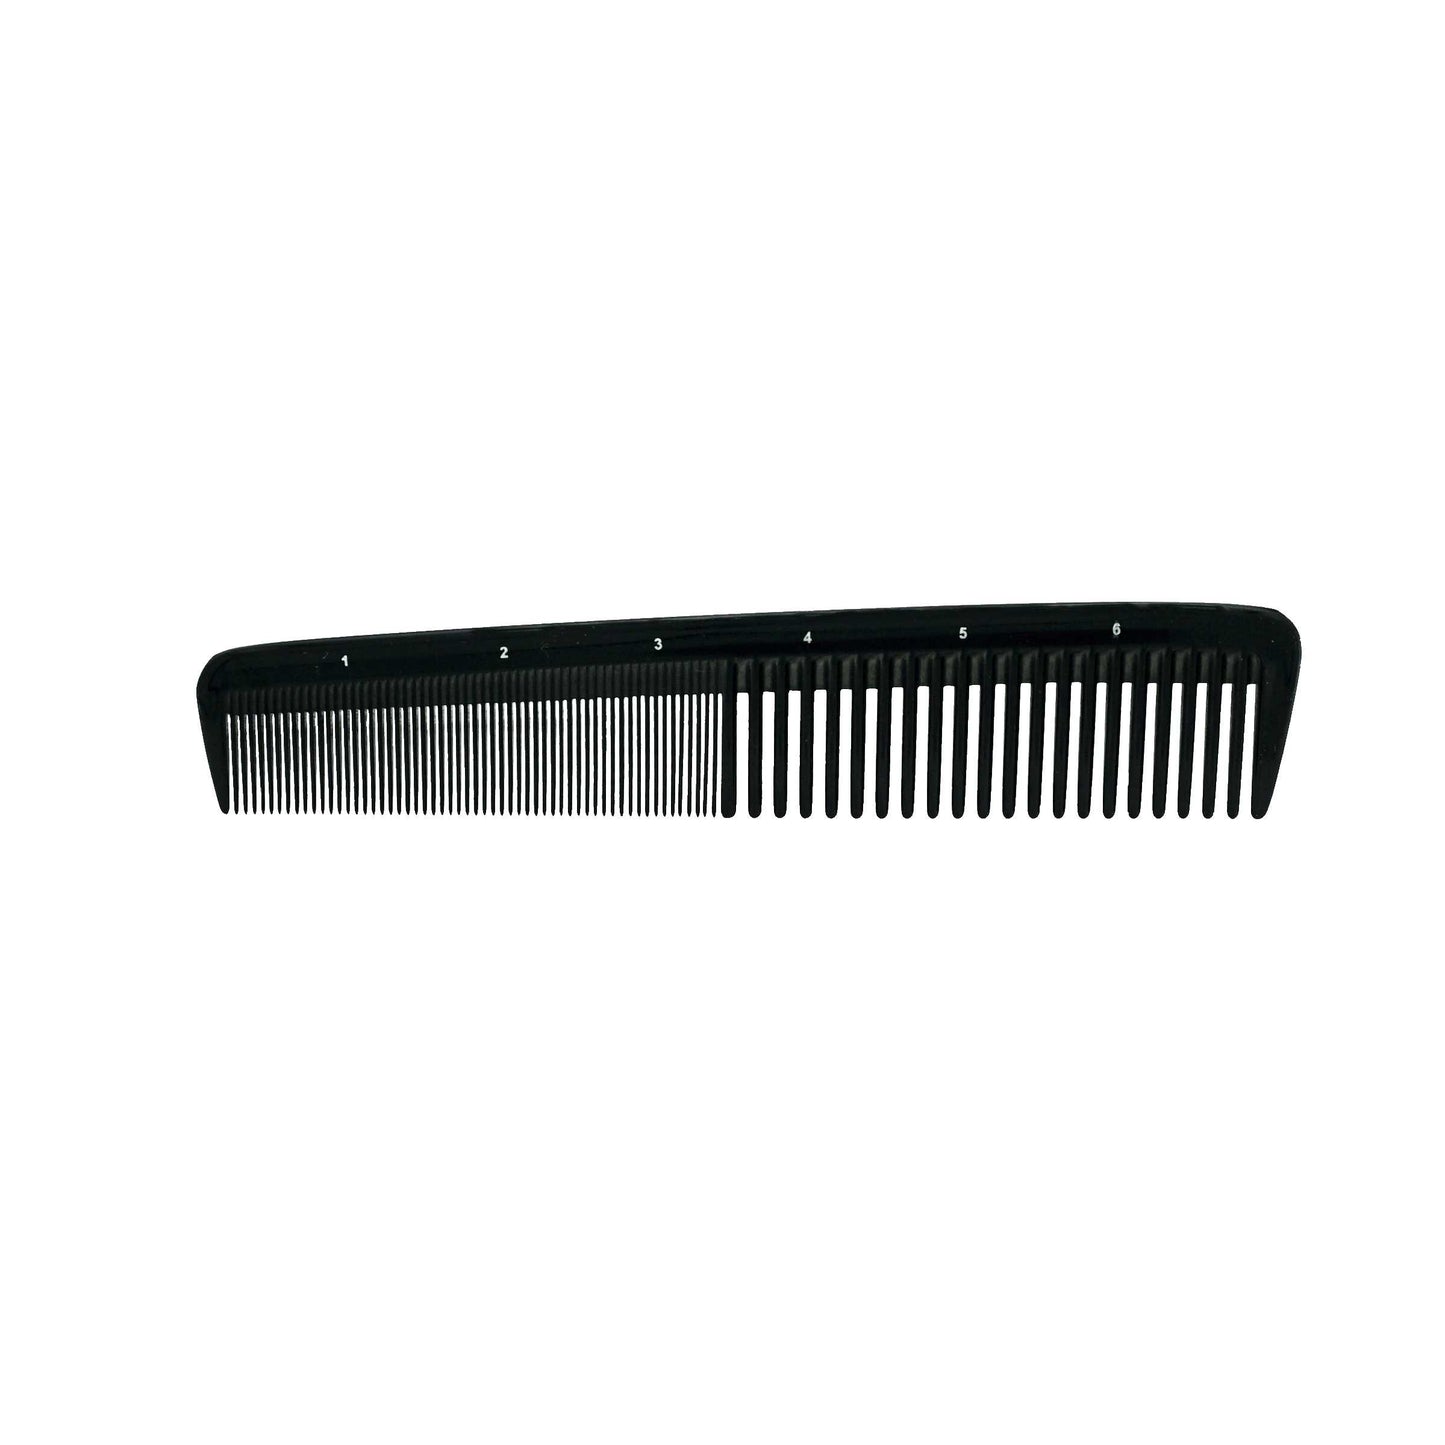 Pegasus 615, 7in Hard Rubber Clipper Comb, Handmade, Seamless, Smooth Edges, Anti Static, Heat and Chemically Resistant, Portable Pocket Purse Dresser Comb | Peines de goma dura - Black